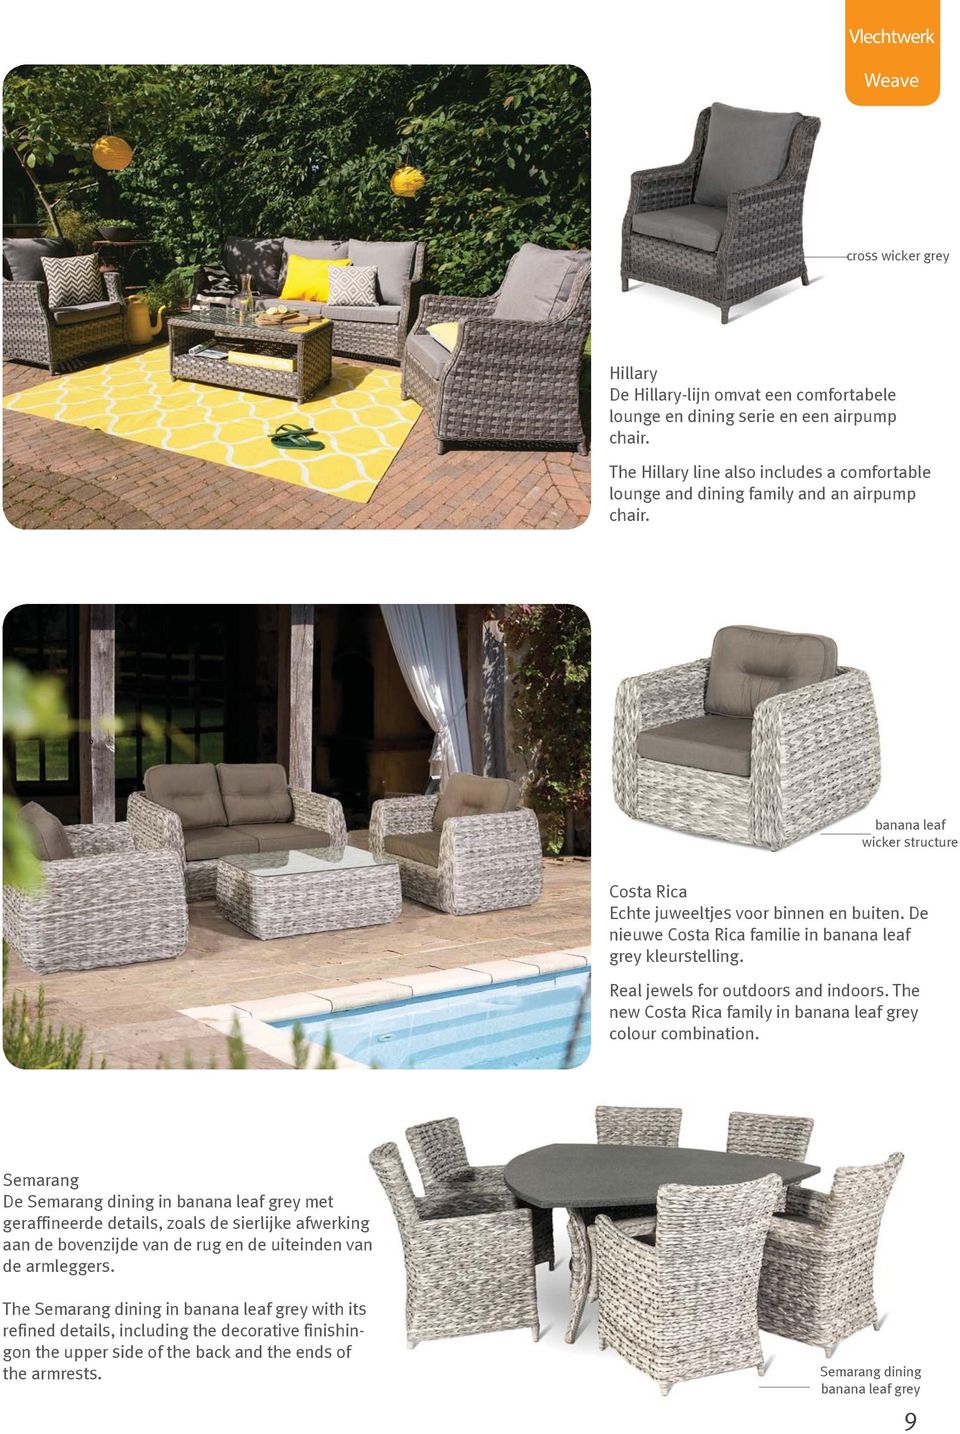 De nieuwe Costa Rica familie in banana leaf grey kleurstelling. Real jewels for outdoors and indoors. The new Costa Rica family in banana leaf grey colour combination.